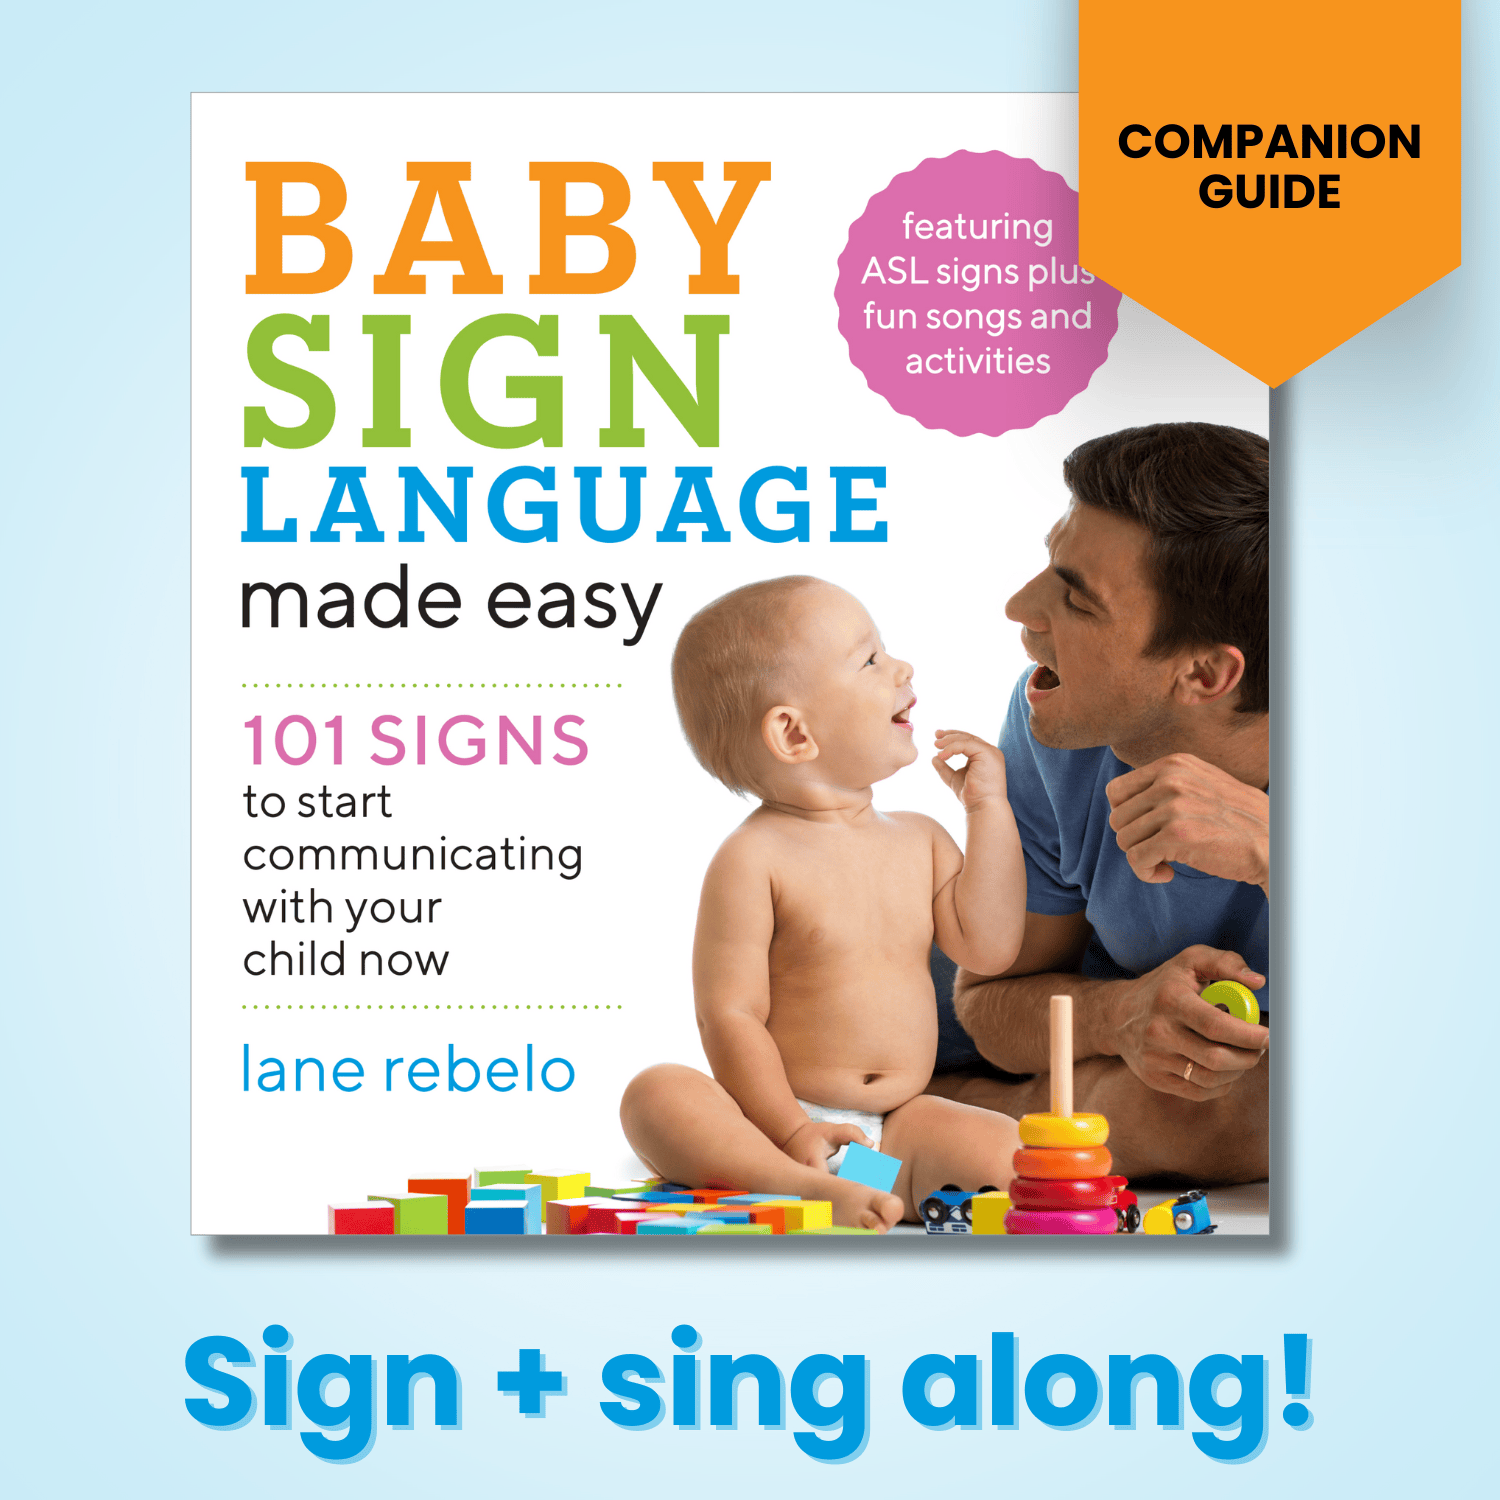 Baby Sign Language Made Easy: Companion Guide